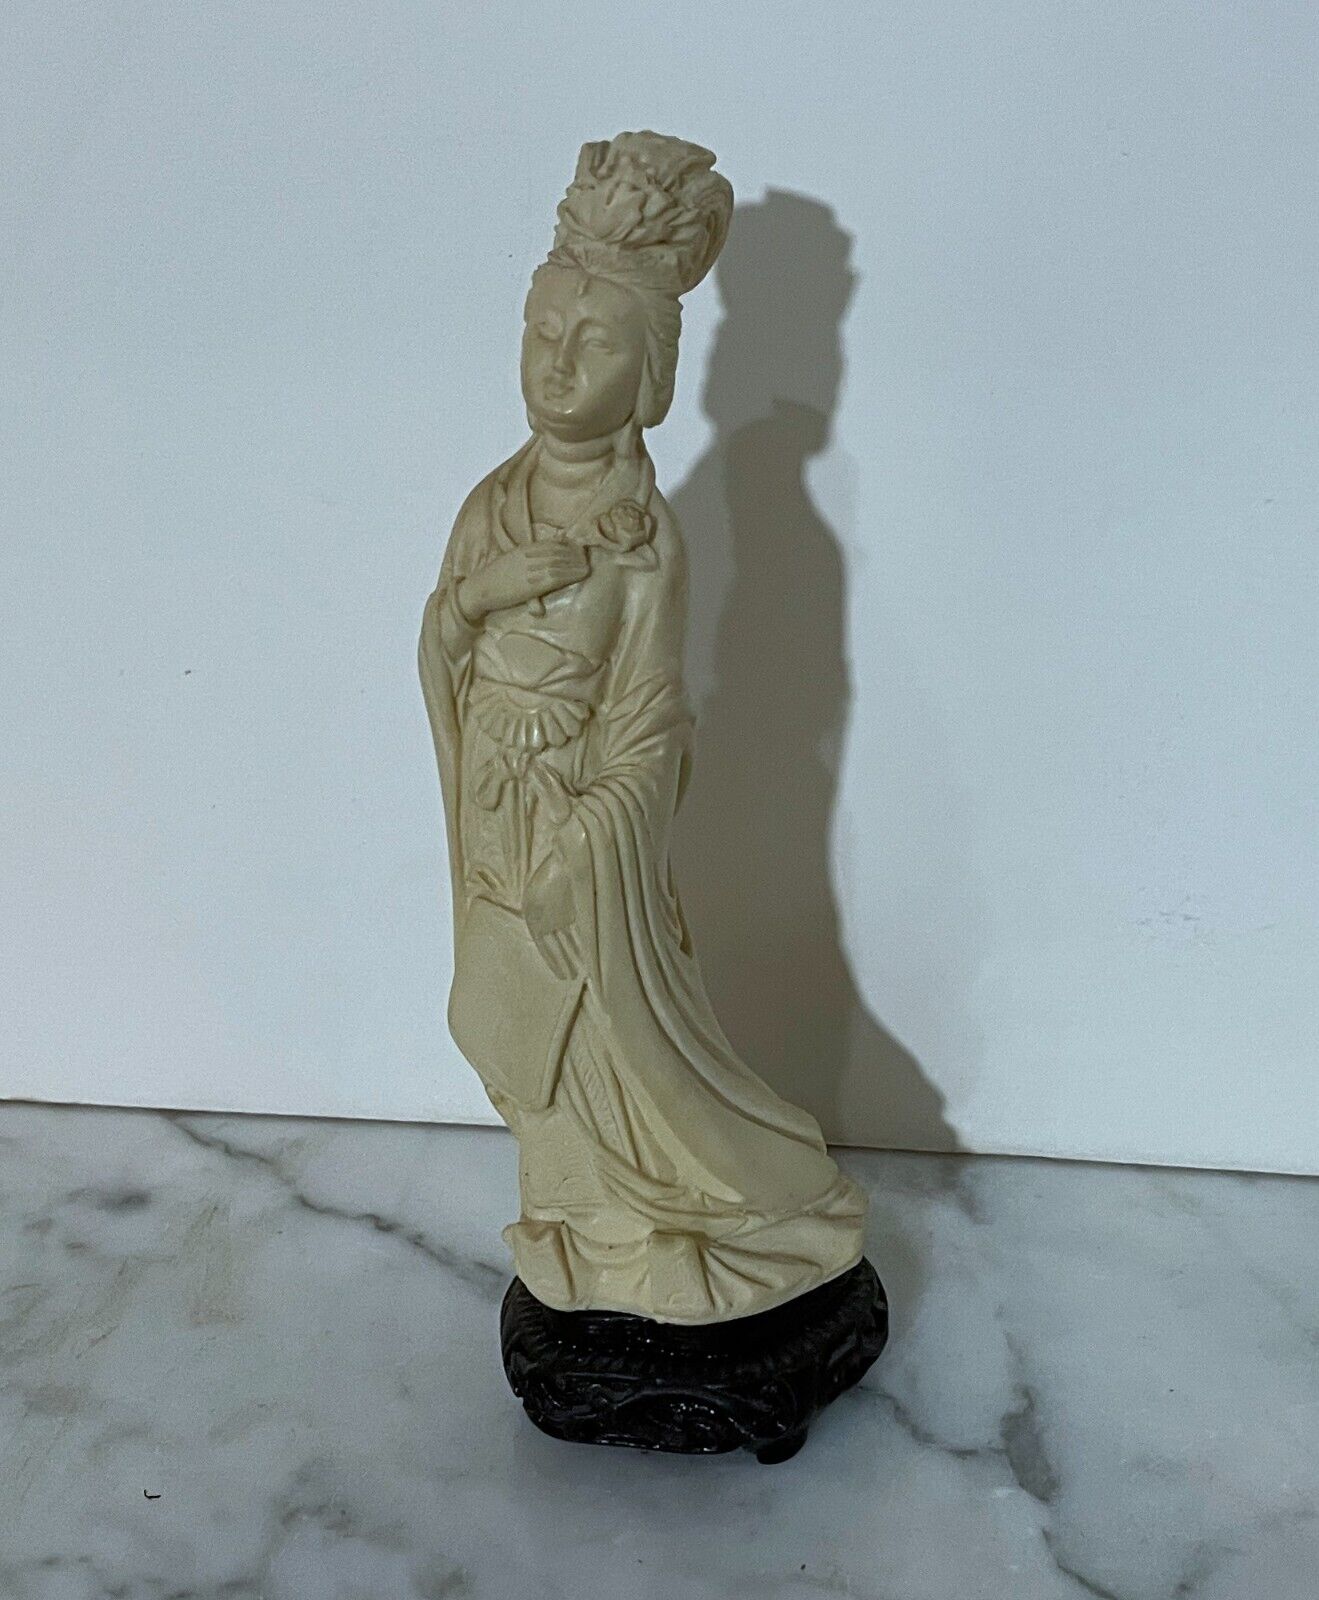 GORGEOUS VINTAGE CHINESE STATUE OF A LADY DRESSED IN TRADITIONAL CLOTHING